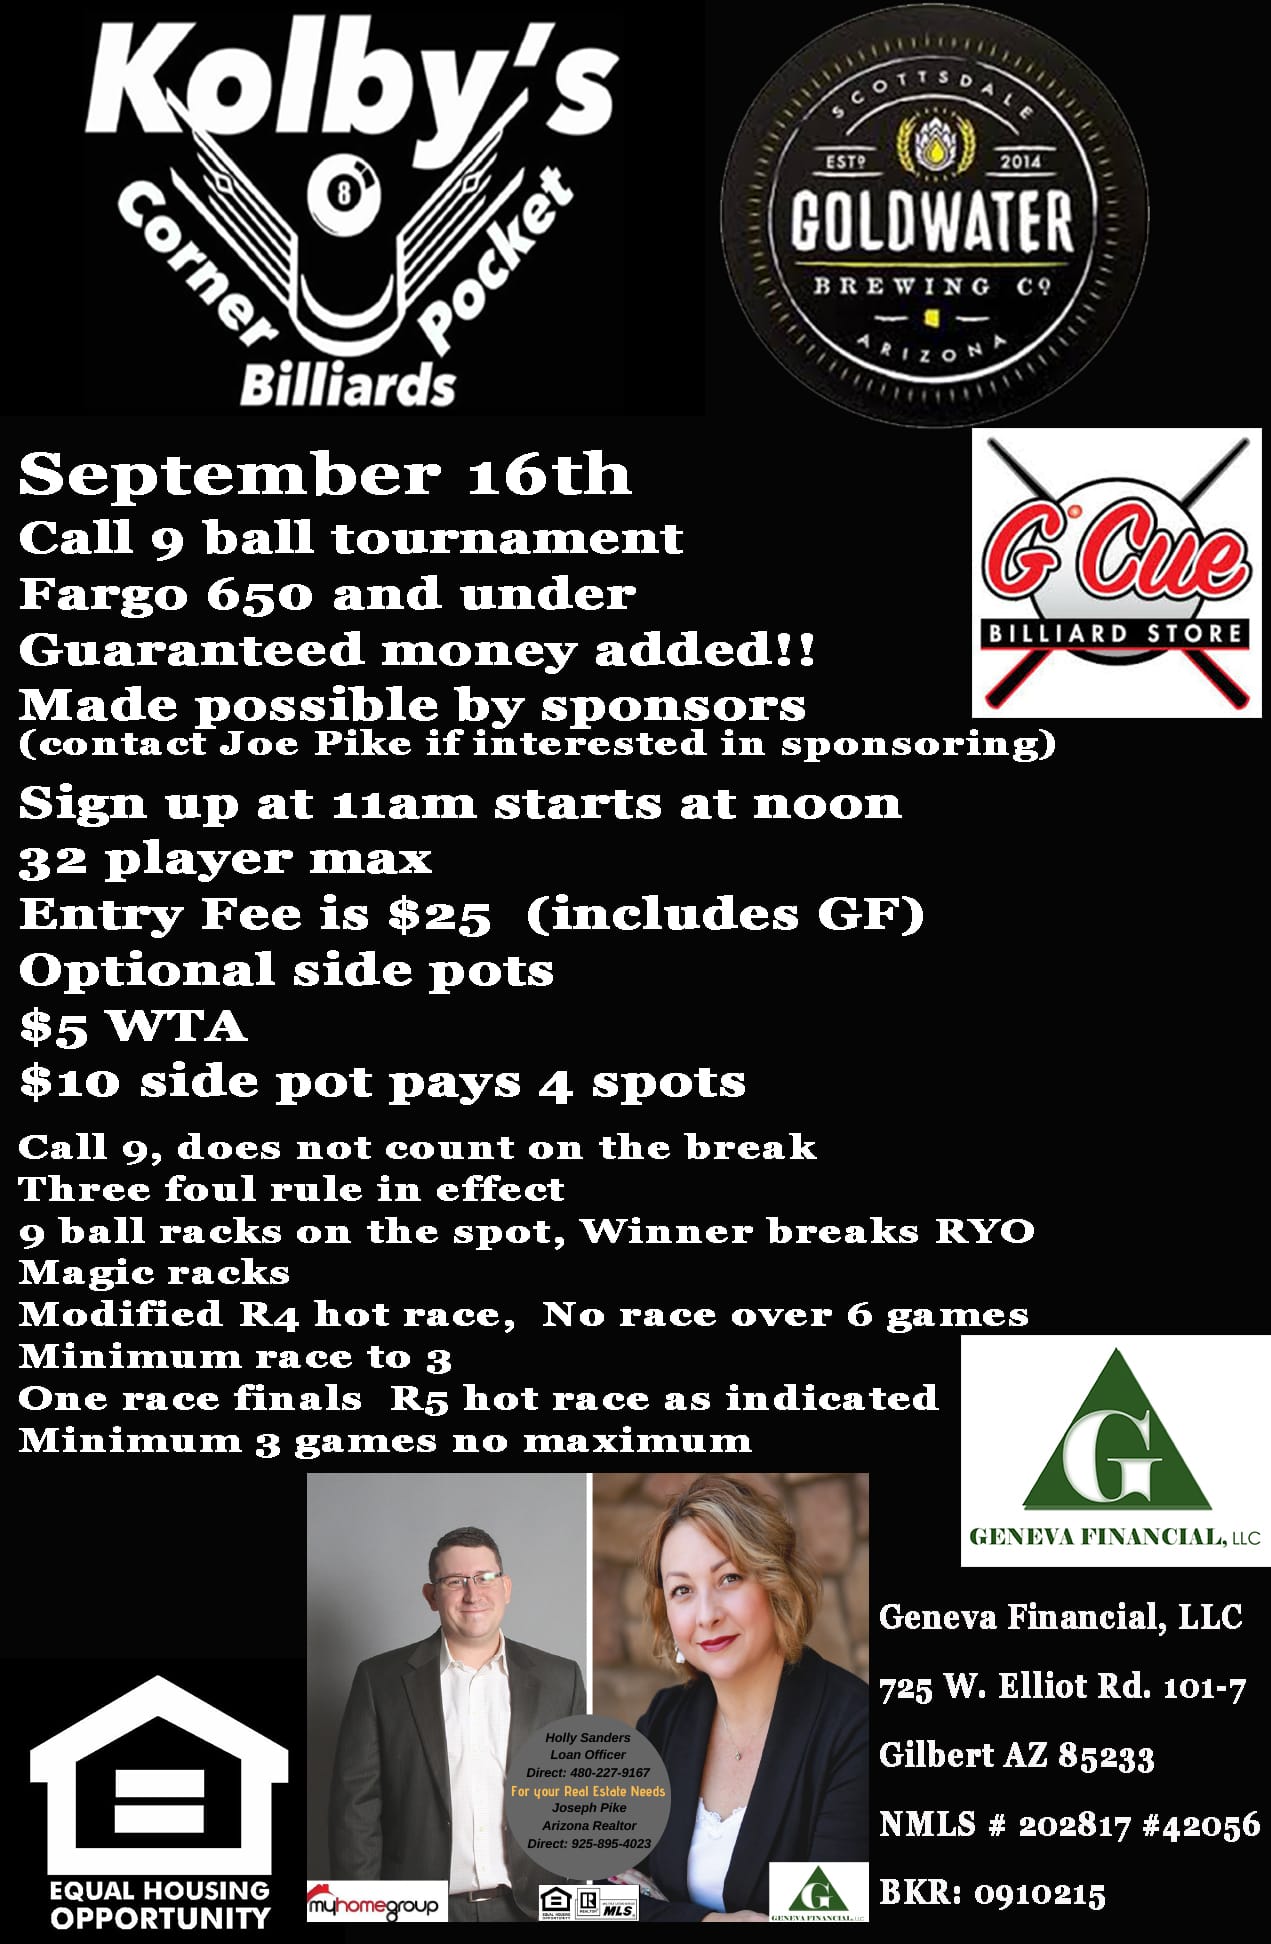 9 Ball 650 and Under-09-16-2018